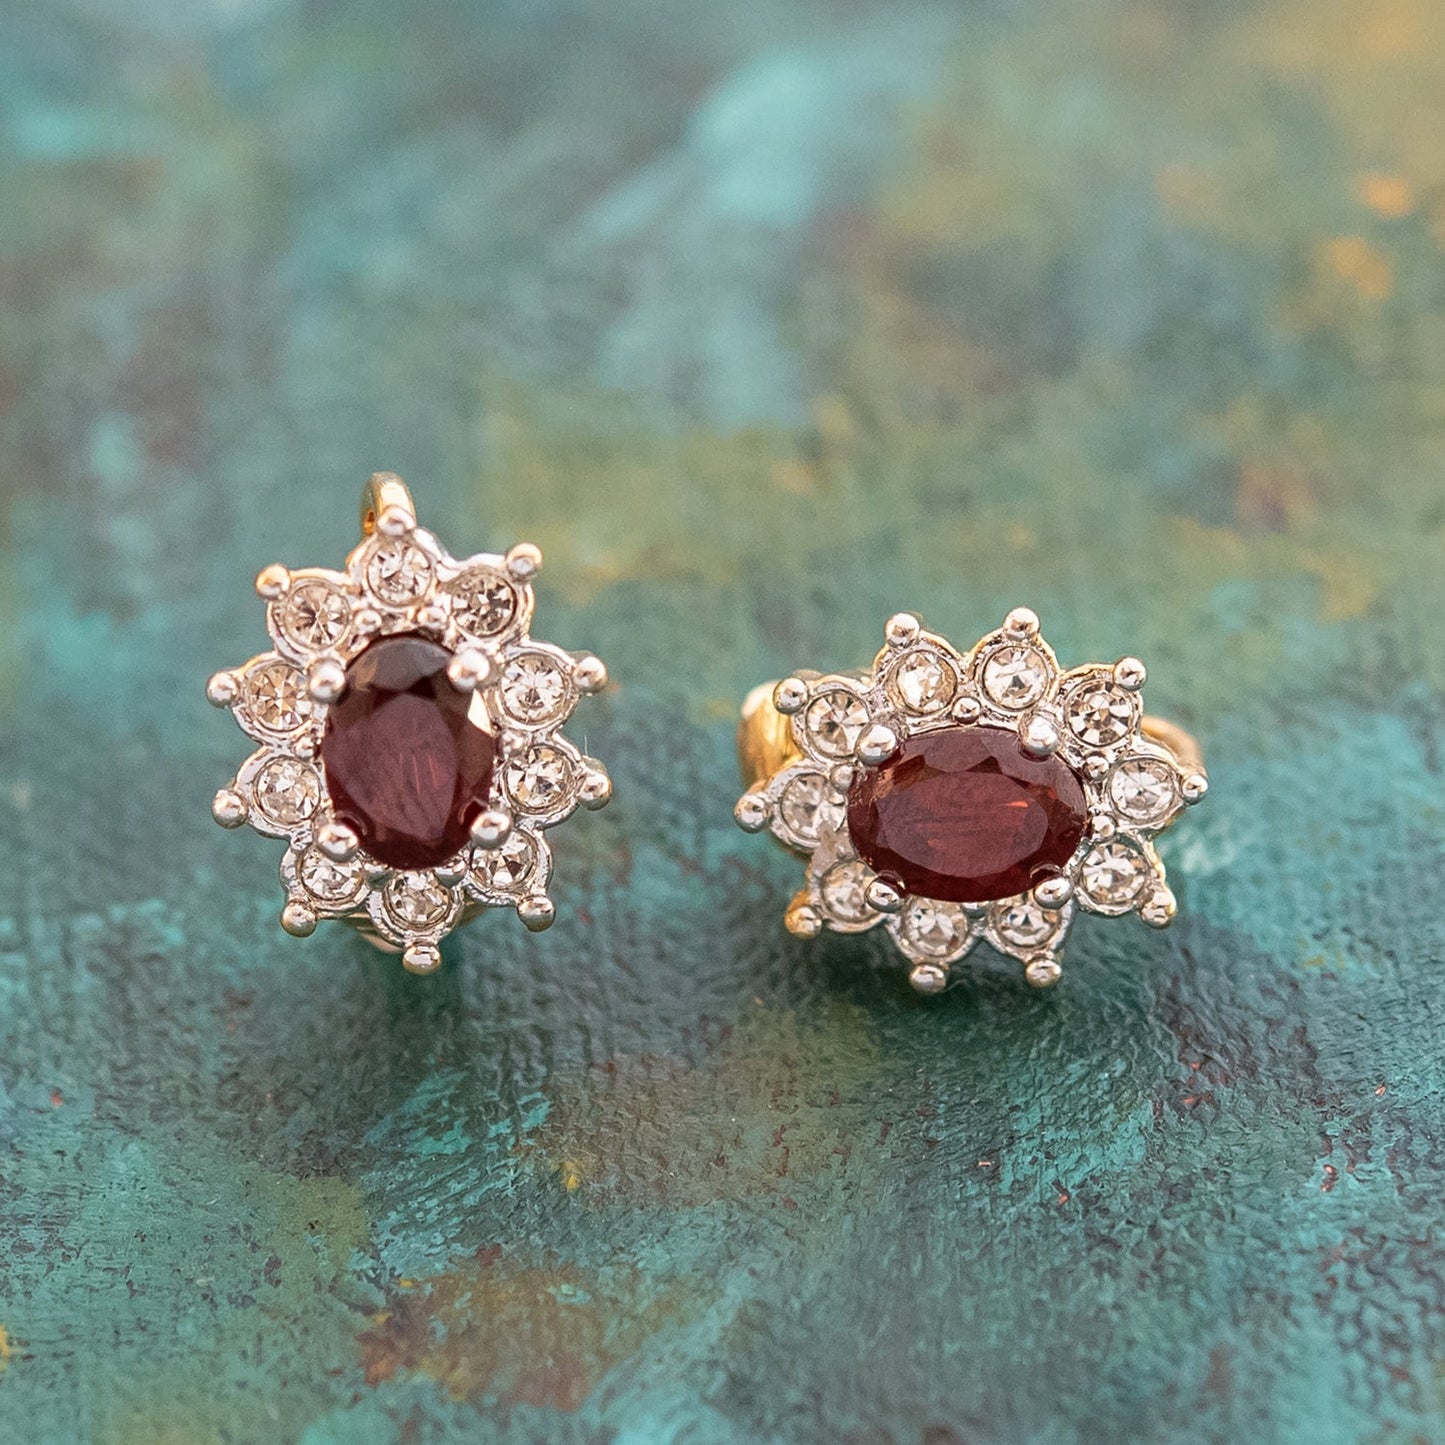 Vintage Genuine Garnet or Light Topaz Crystal Surrounded by Austrian Crystal Earrings 18k Yellow Gold Electroplated by PVD Vintage Jewelry